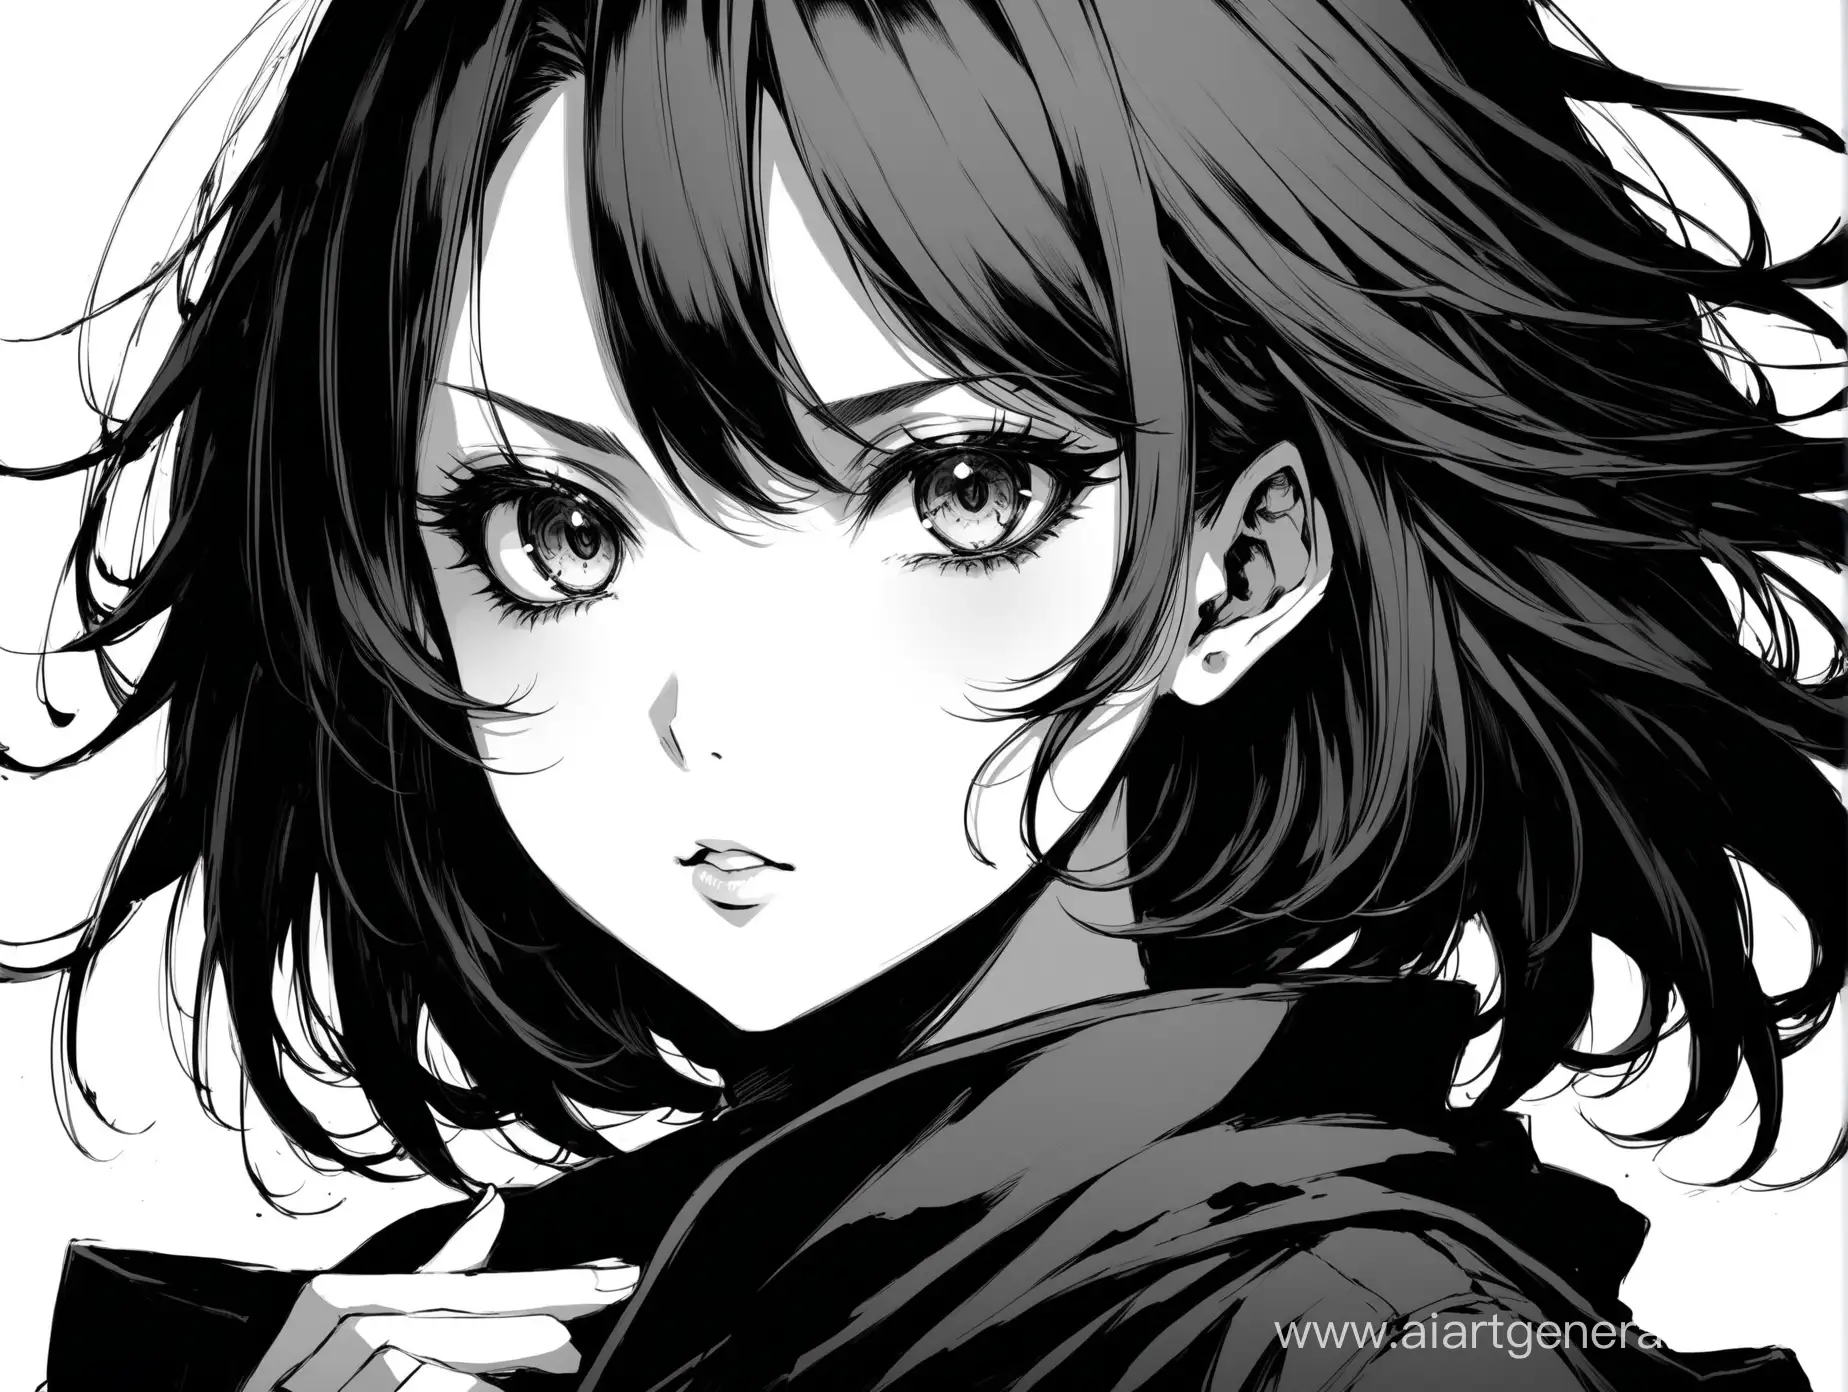 anime art dark style, black and white colors, super detailed